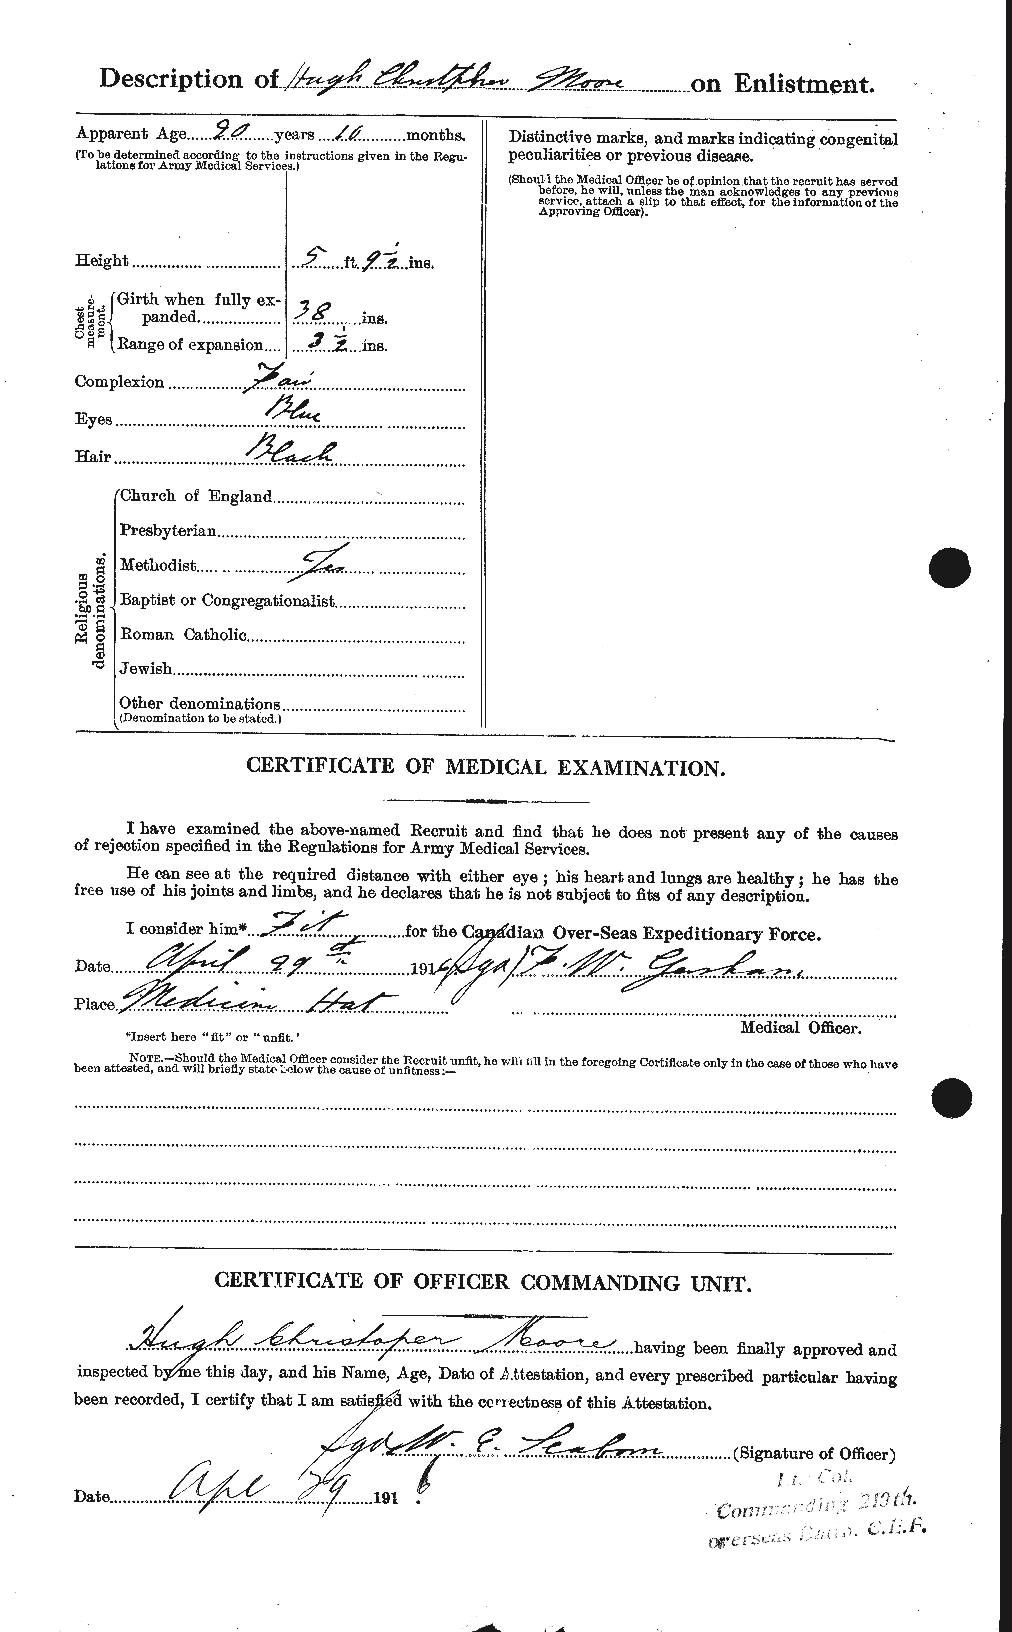 Personnel Records of the First World War - CEF 502148b